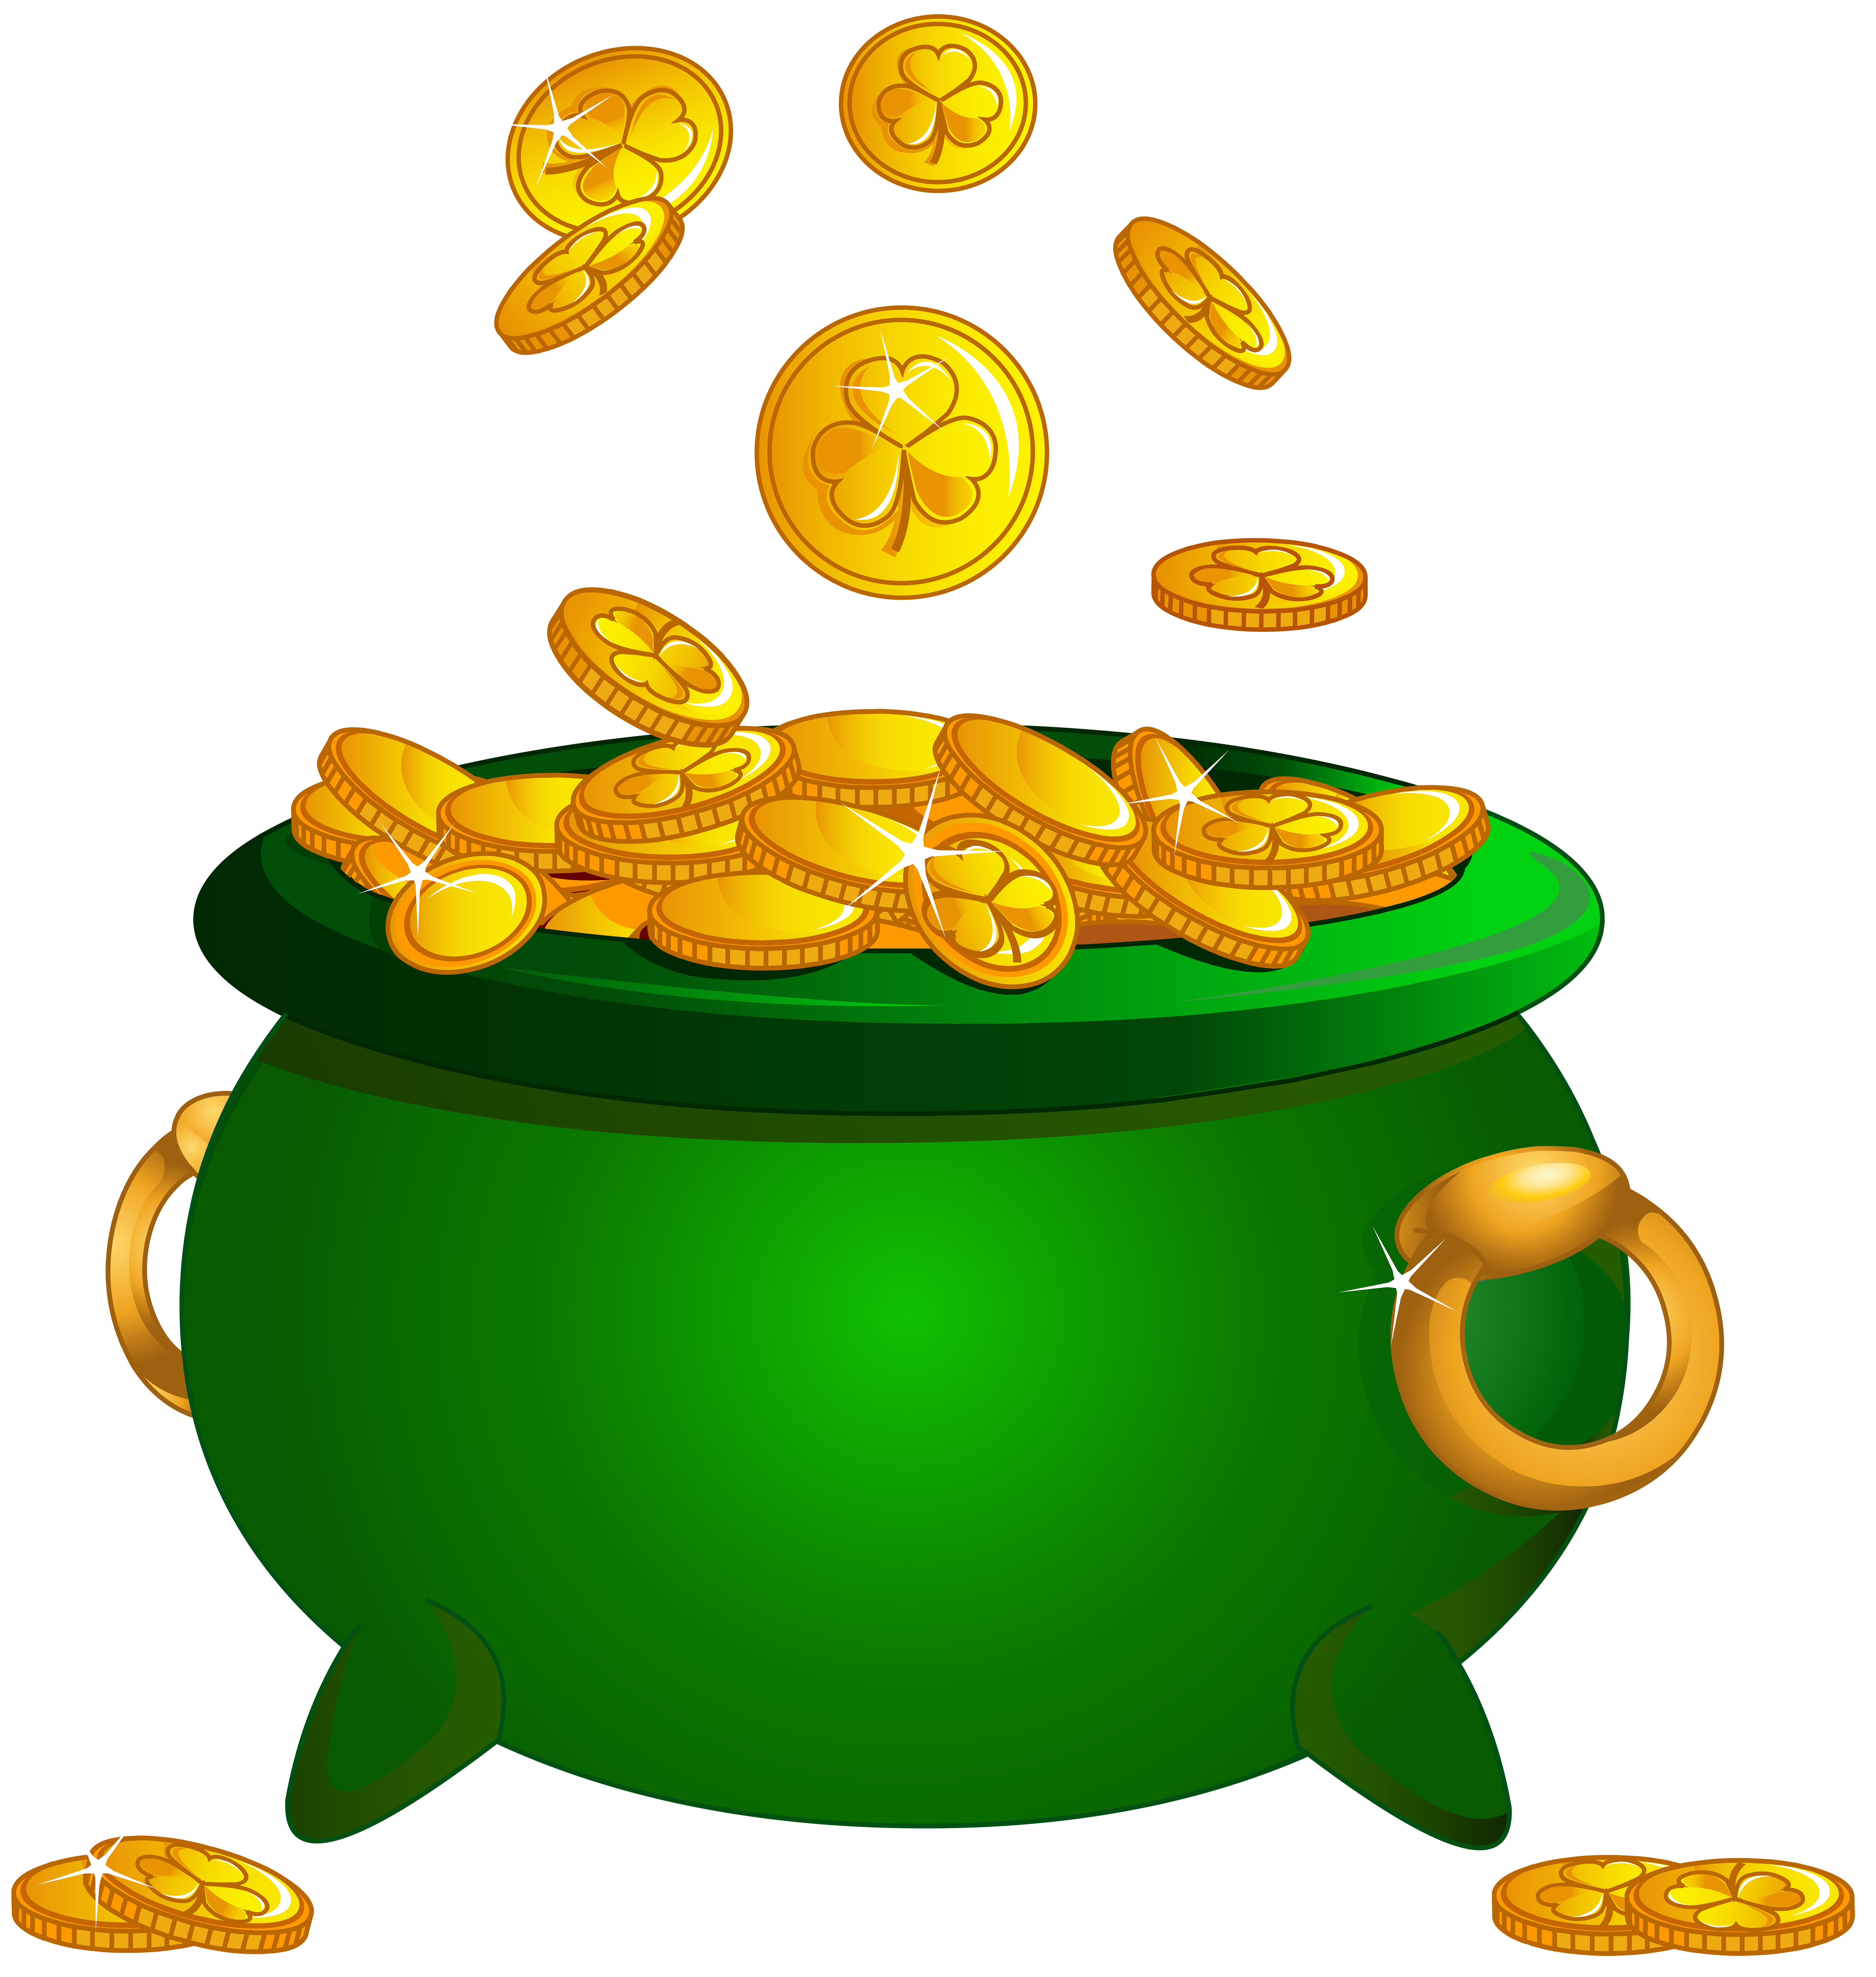 Download Free SVG Cut File - Lucky Pot of Gold SVG St. Patrick's Day C...